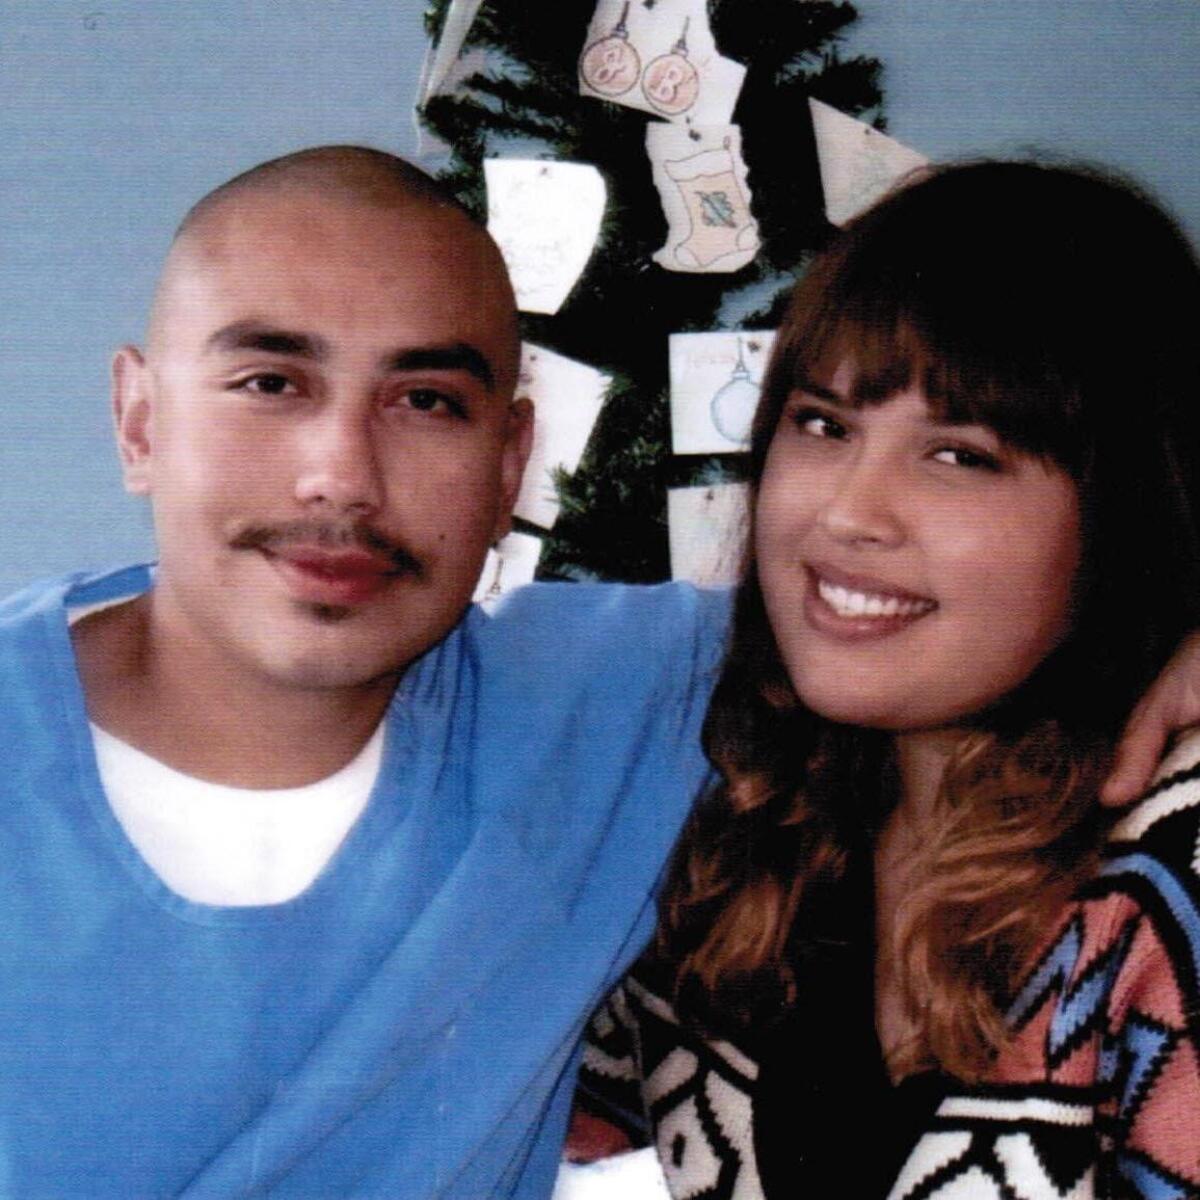 Johanna Diaz and her brother, Jose Armendariz, who is incarcerated at Theo Lacy jail.